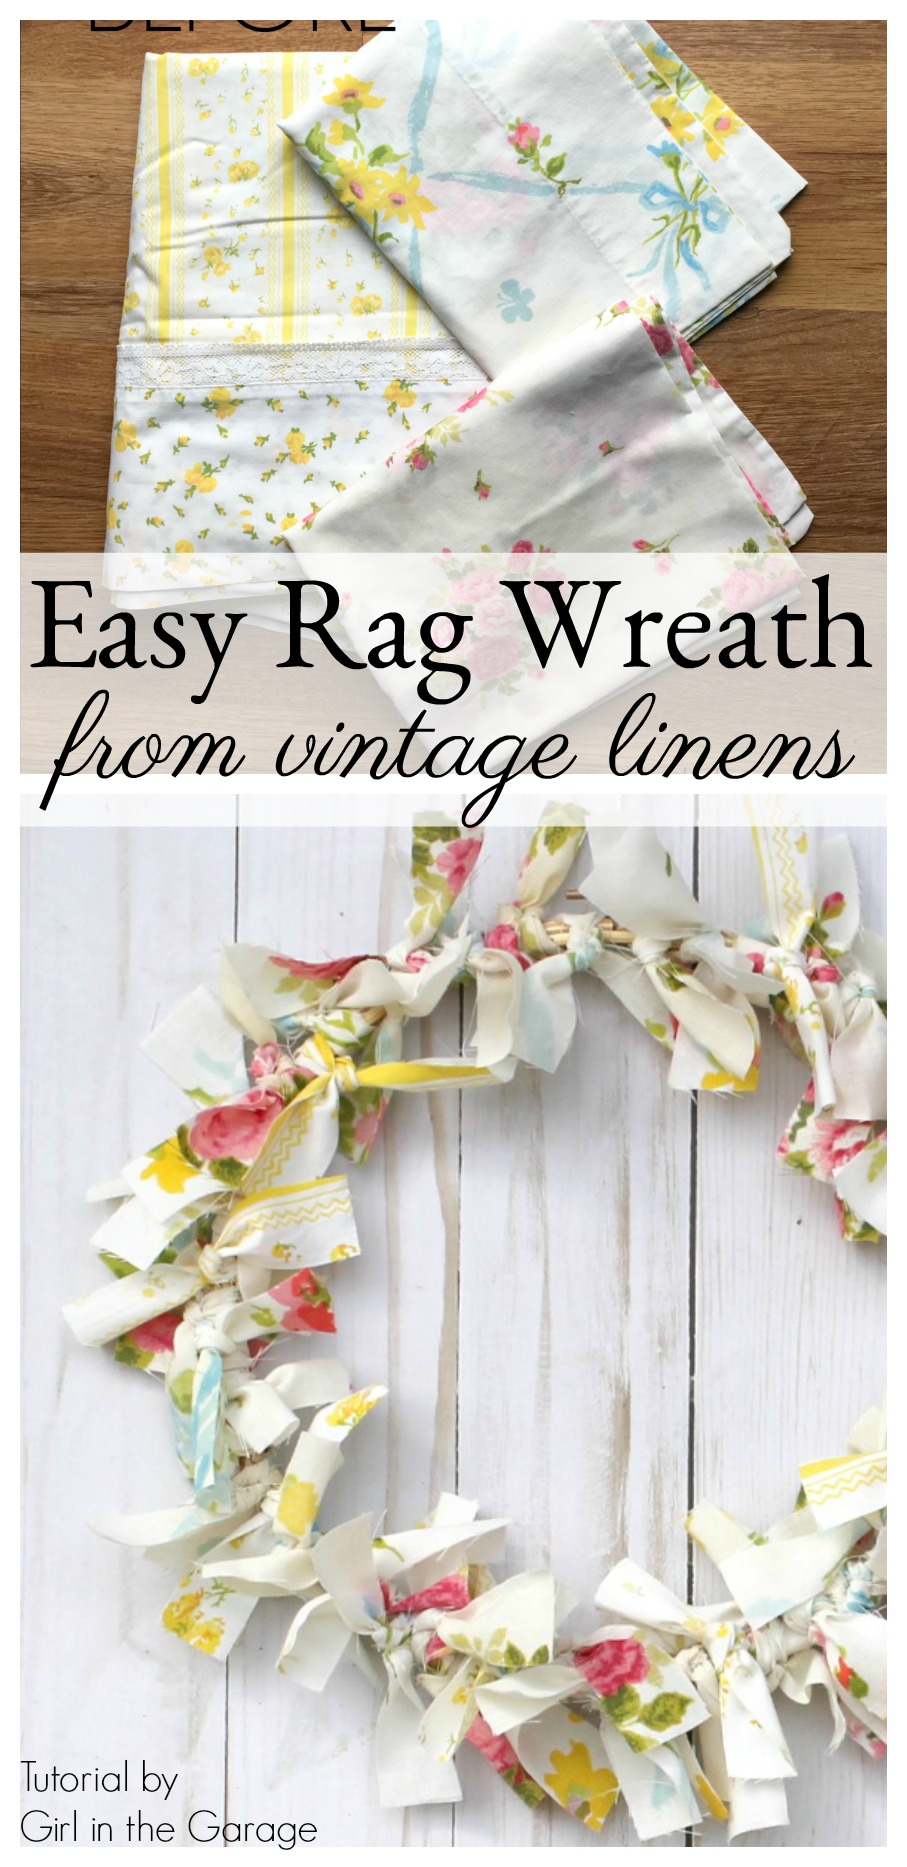 Make an easy DIY rag wreath for spring with vintage fabric - Step-by-step tutorial by Girl in the Garage